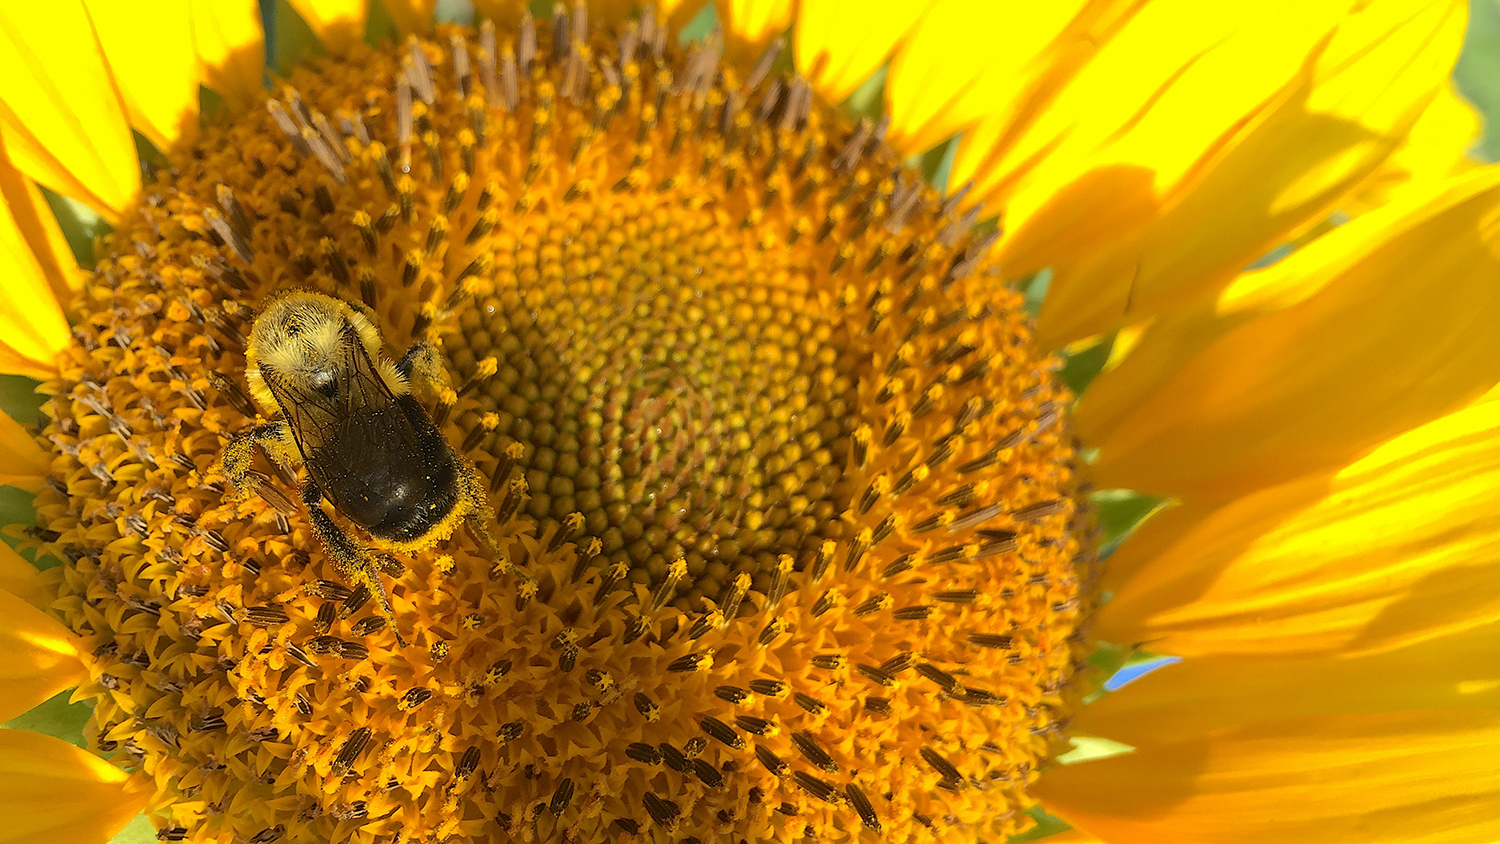 Photo of a bumble bee on a sunflower.